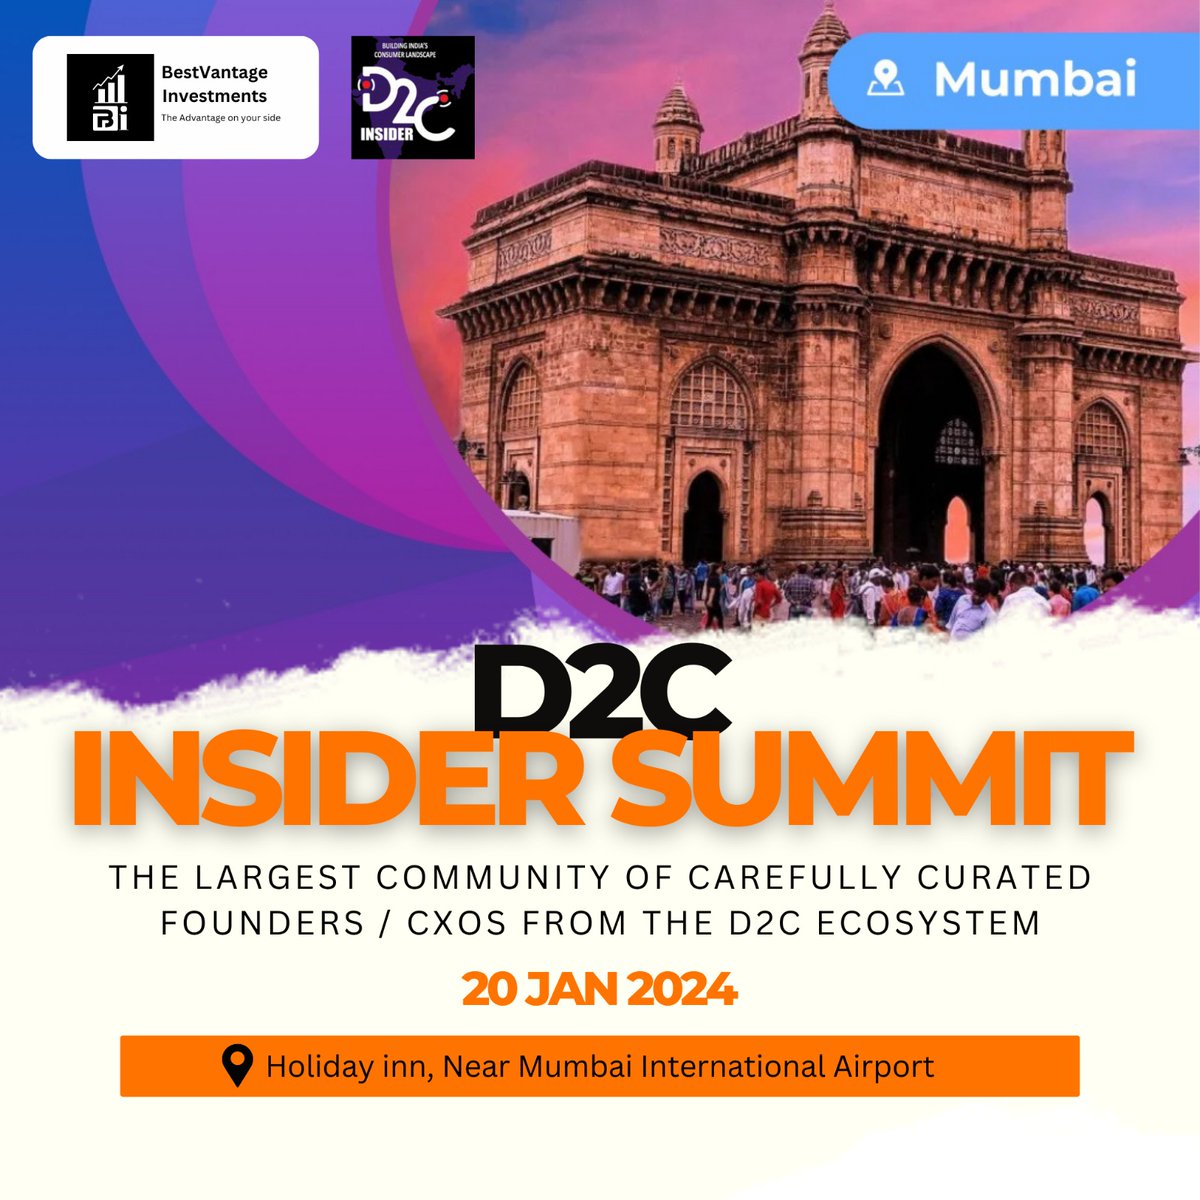 Thrilled to announce that Bestvantage Investments has been featured in the prestigious D2C Insider Summit! Dive into the latest trends, strategies, and success stories within the Direct-to-Consumer (D2C) realm. Join us as we redefine networking.

#startupindia #d2cindia